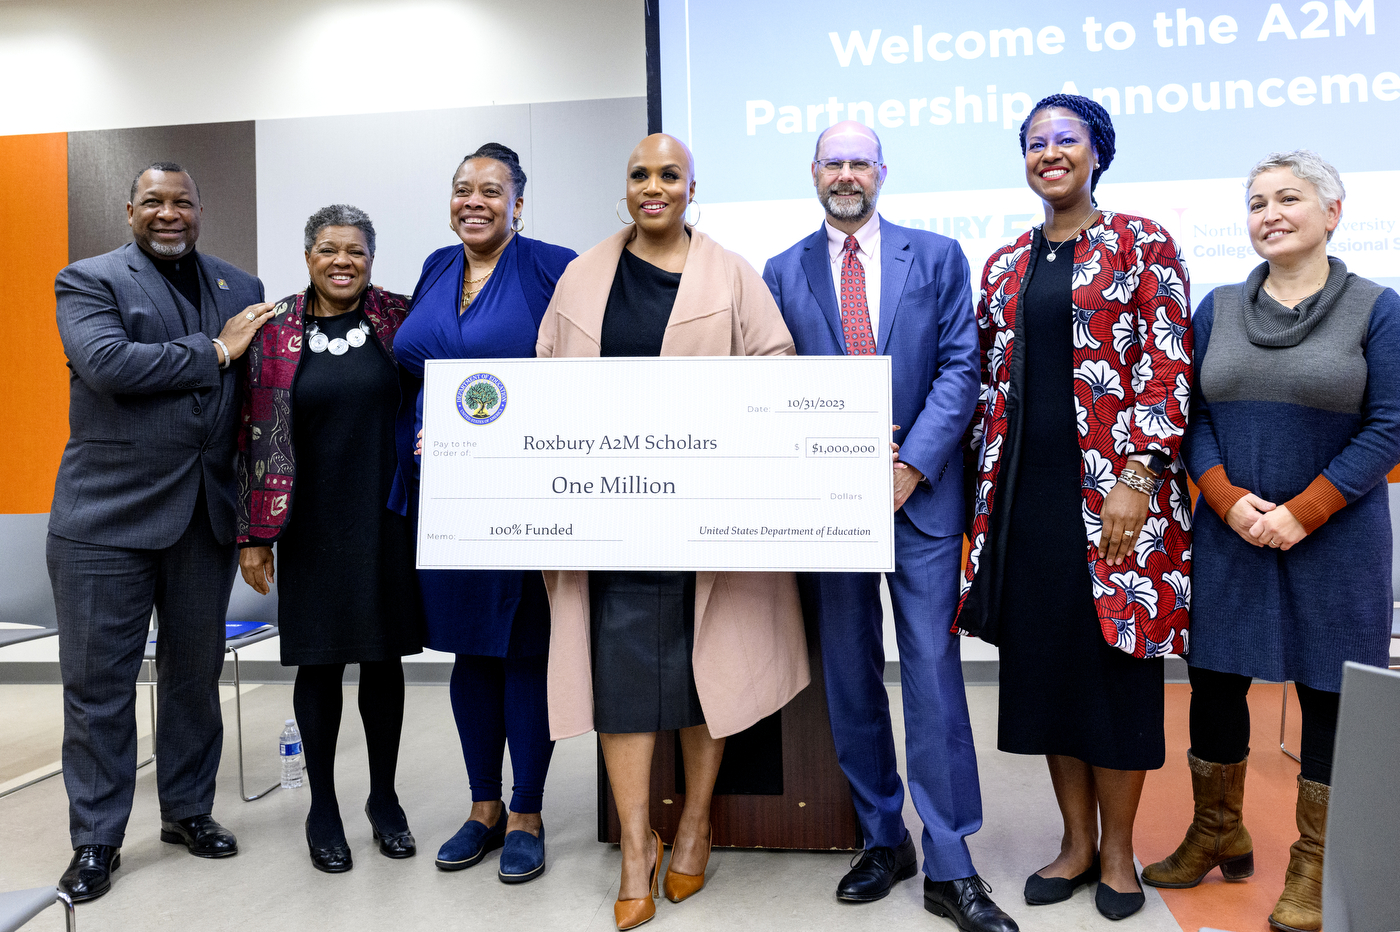 U.S. Rep. Ayanna Pressley posing for a photo with a group of people while holding a large check to Roxbury A2M Scholars for $1 million 